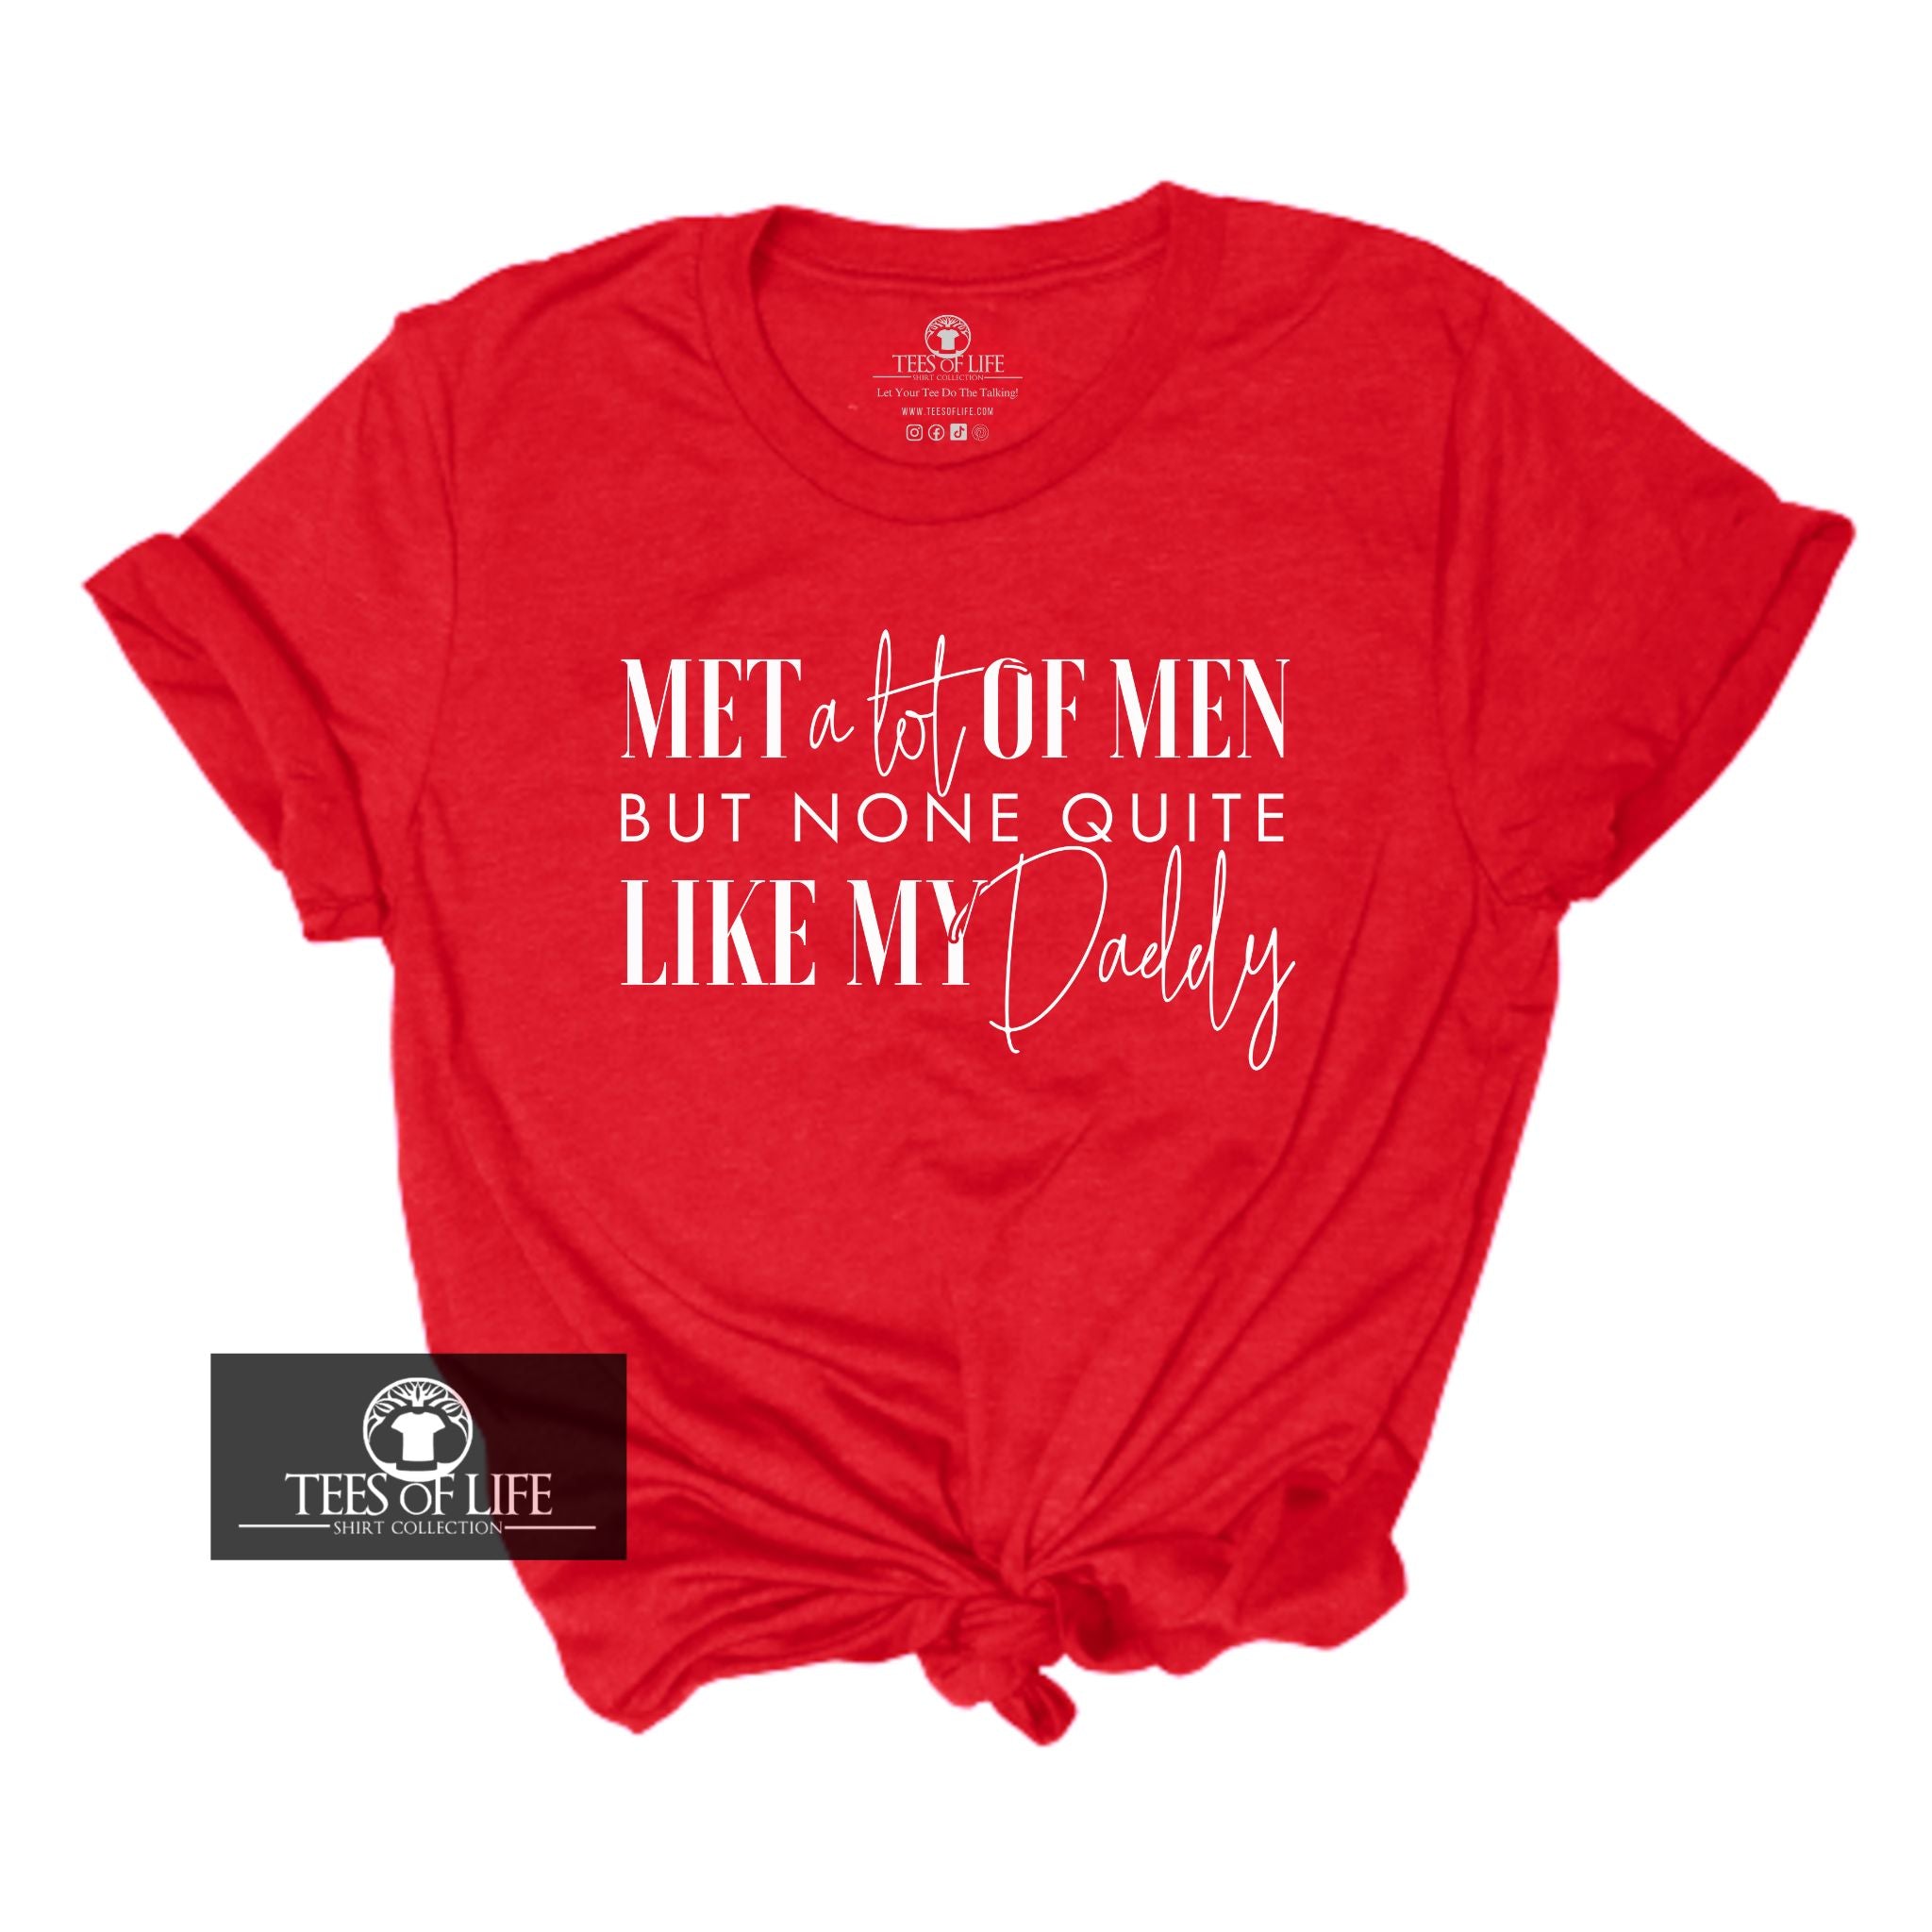 None Quite Like My Daddy Unisex Tee